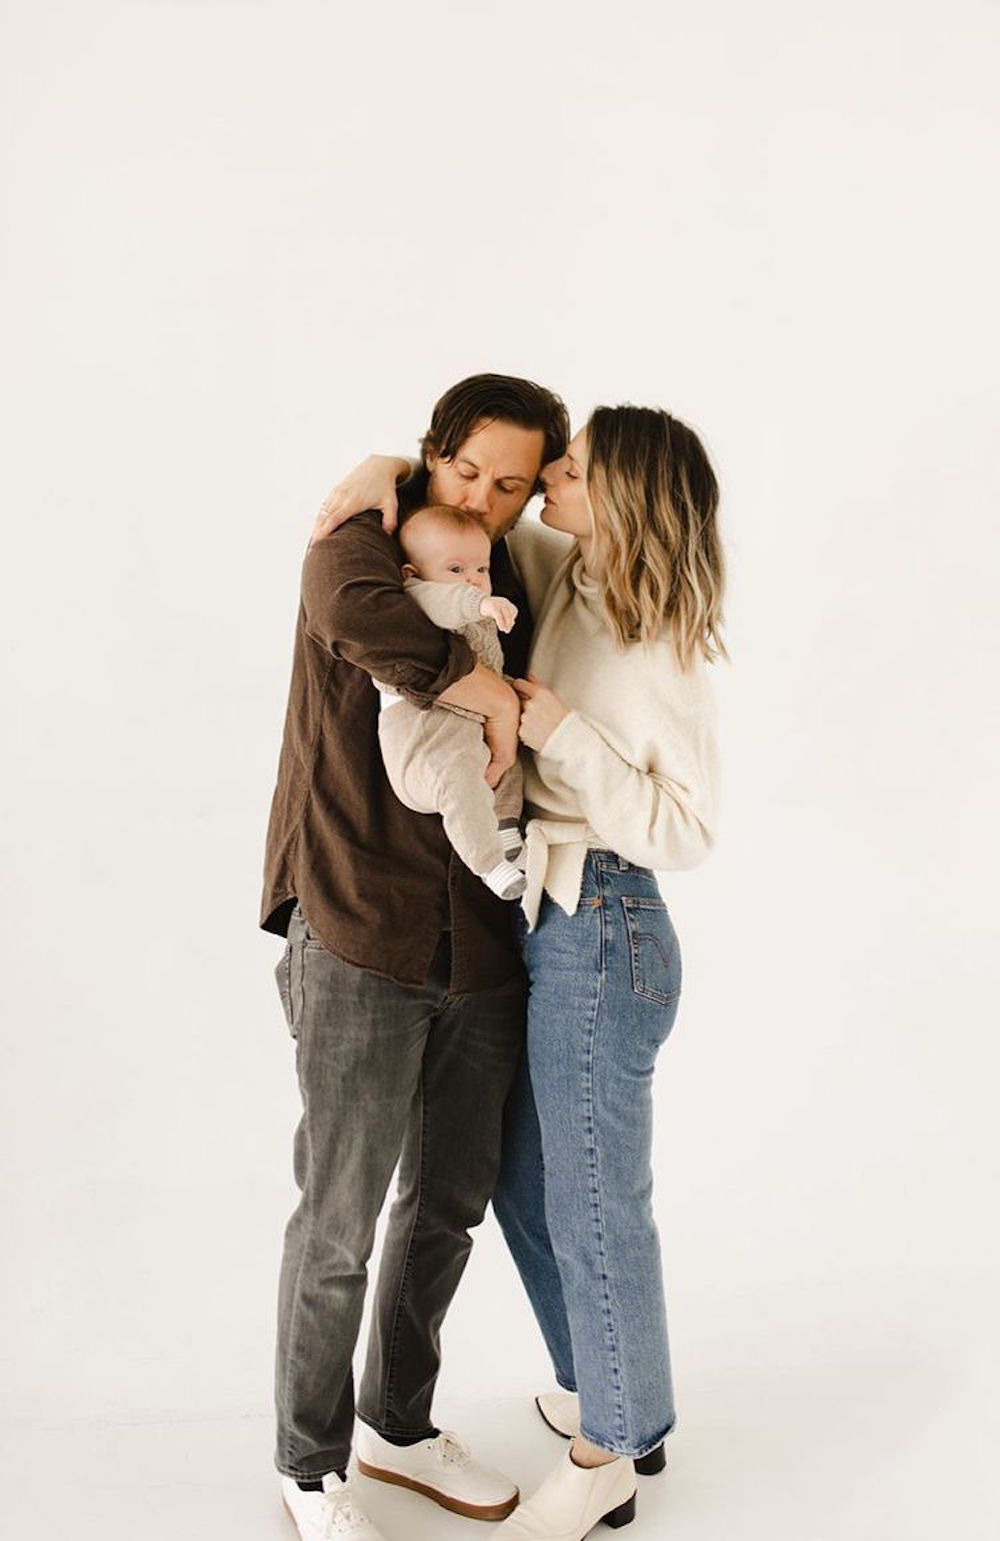 image of a family with a woman, man, and baby against a white wall for a family photoshoot, wearing jeans and casual tops